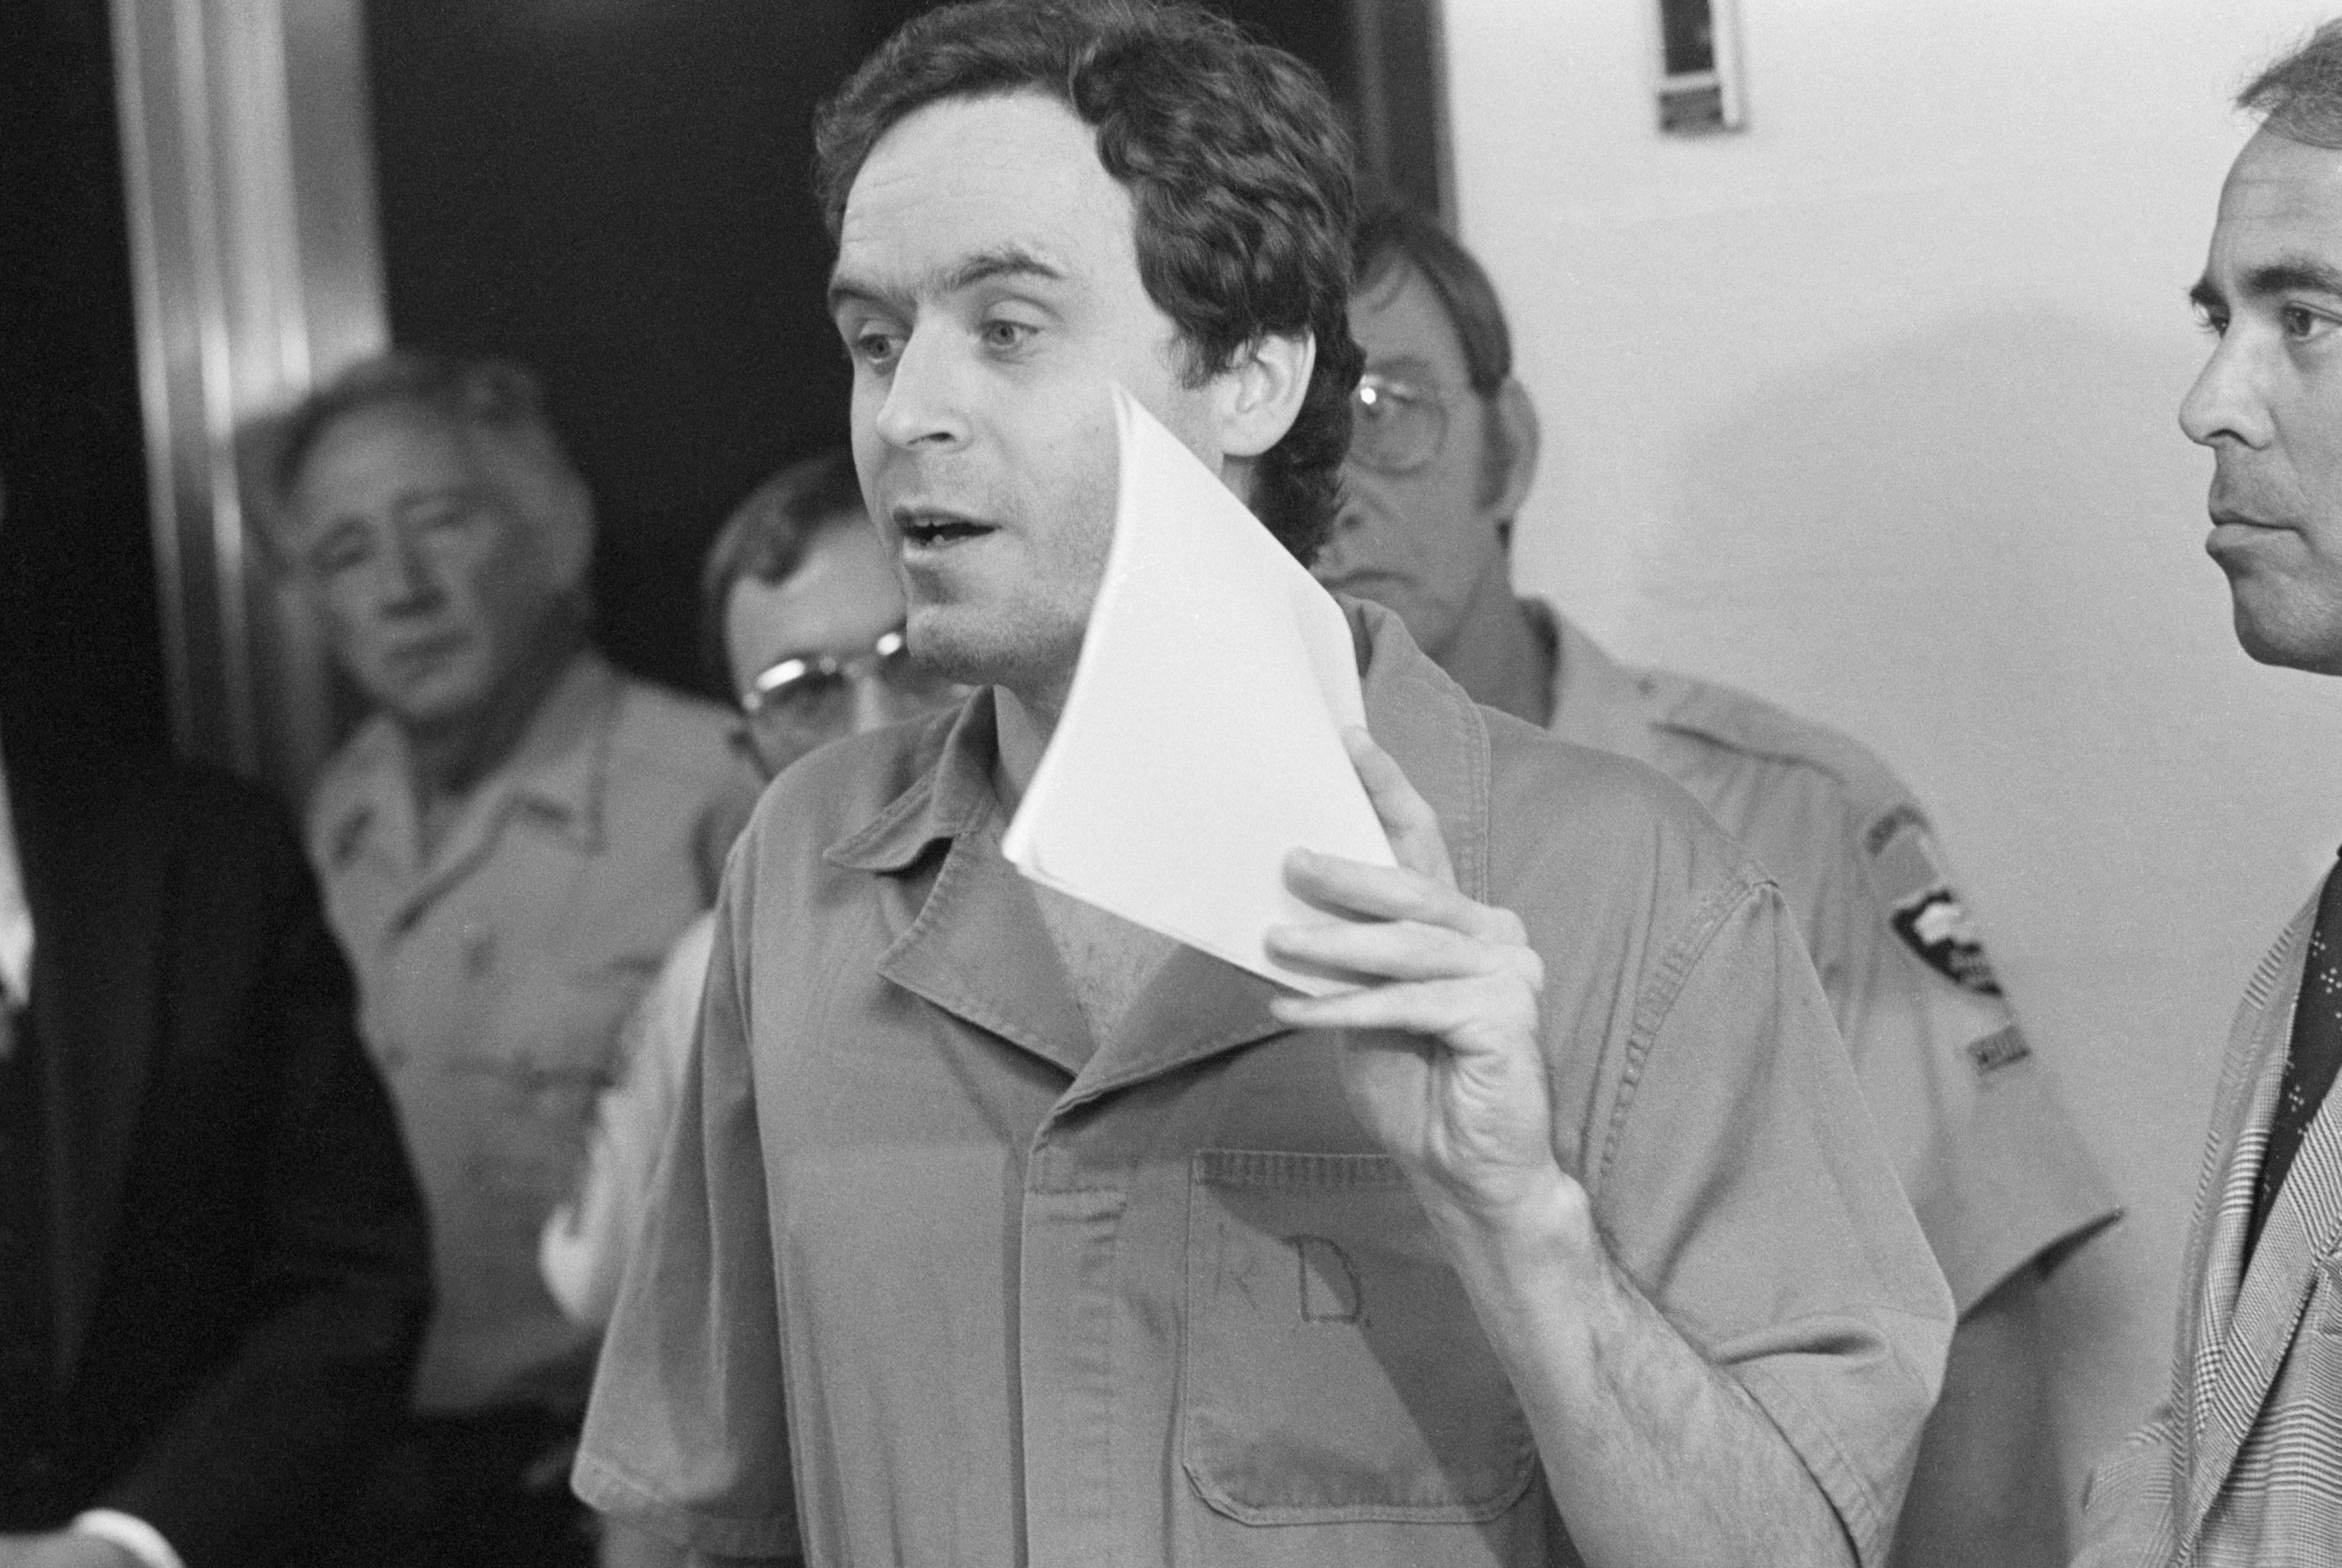 Photo of Ted Bundy in court on July 27, 1978 | Source: Getty Images